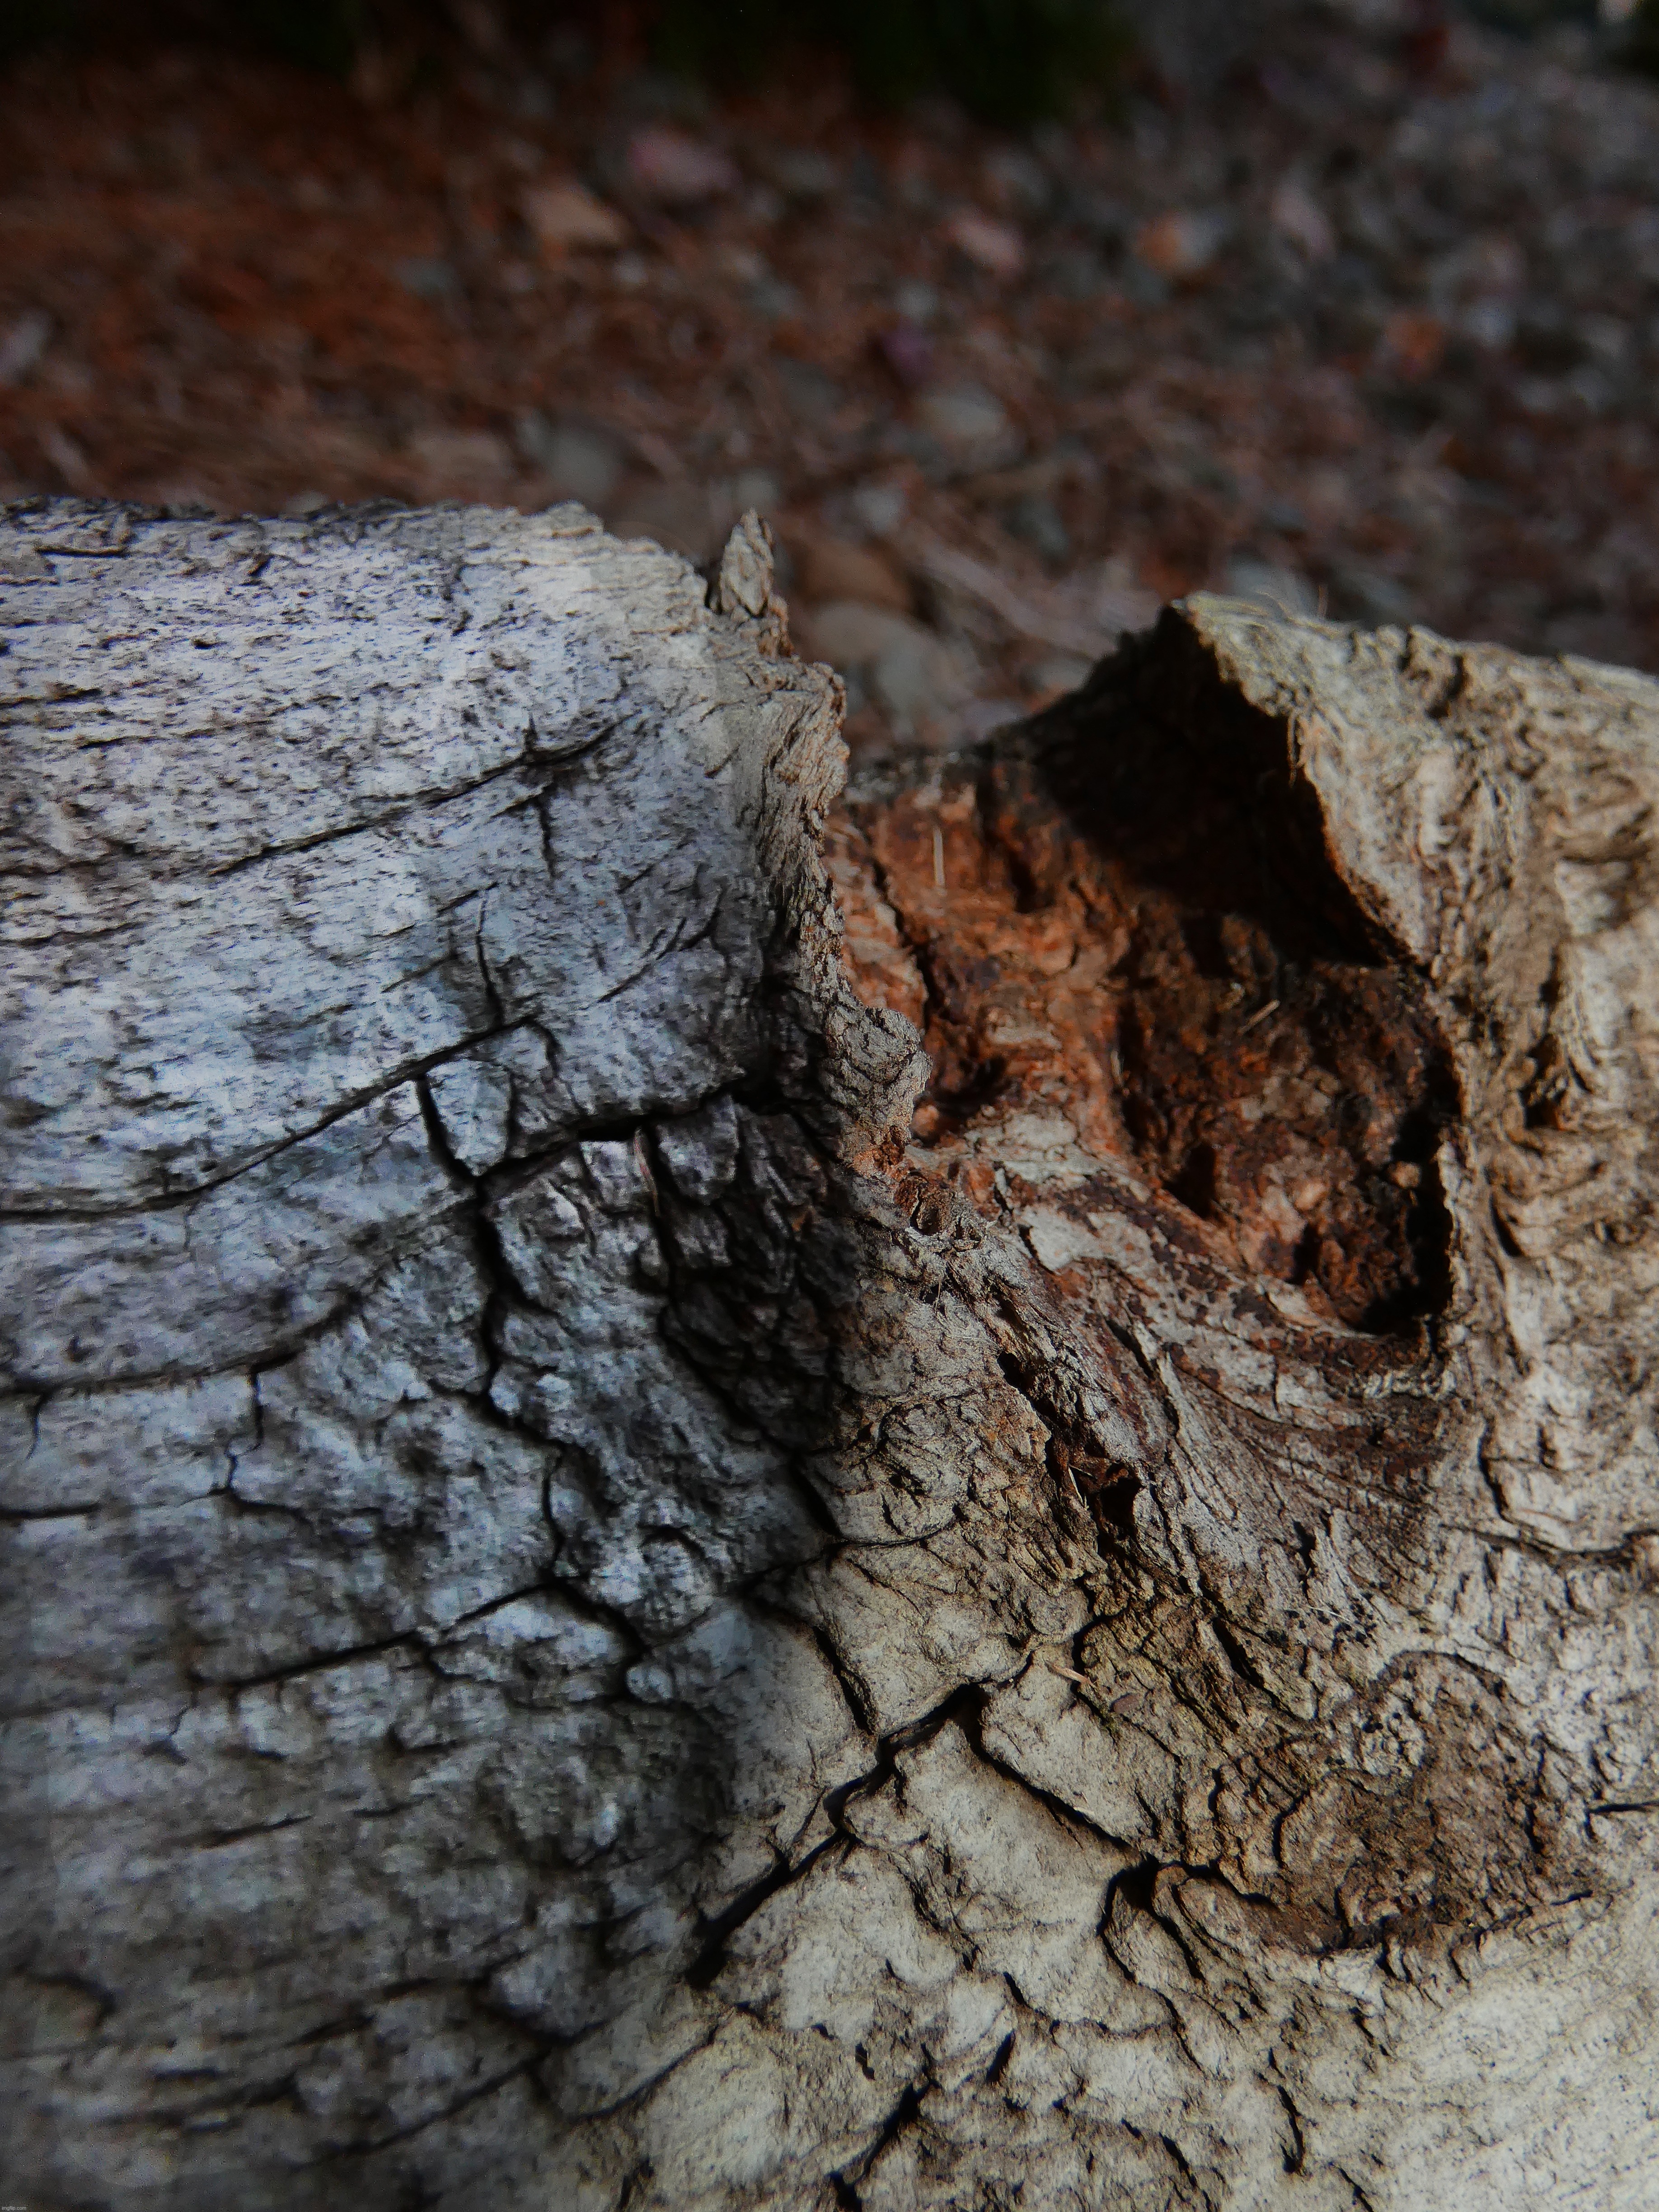 Wood Divot | image tagged in share your own photos,photography,lumix fz80 | made w/ Imgflip meme maker